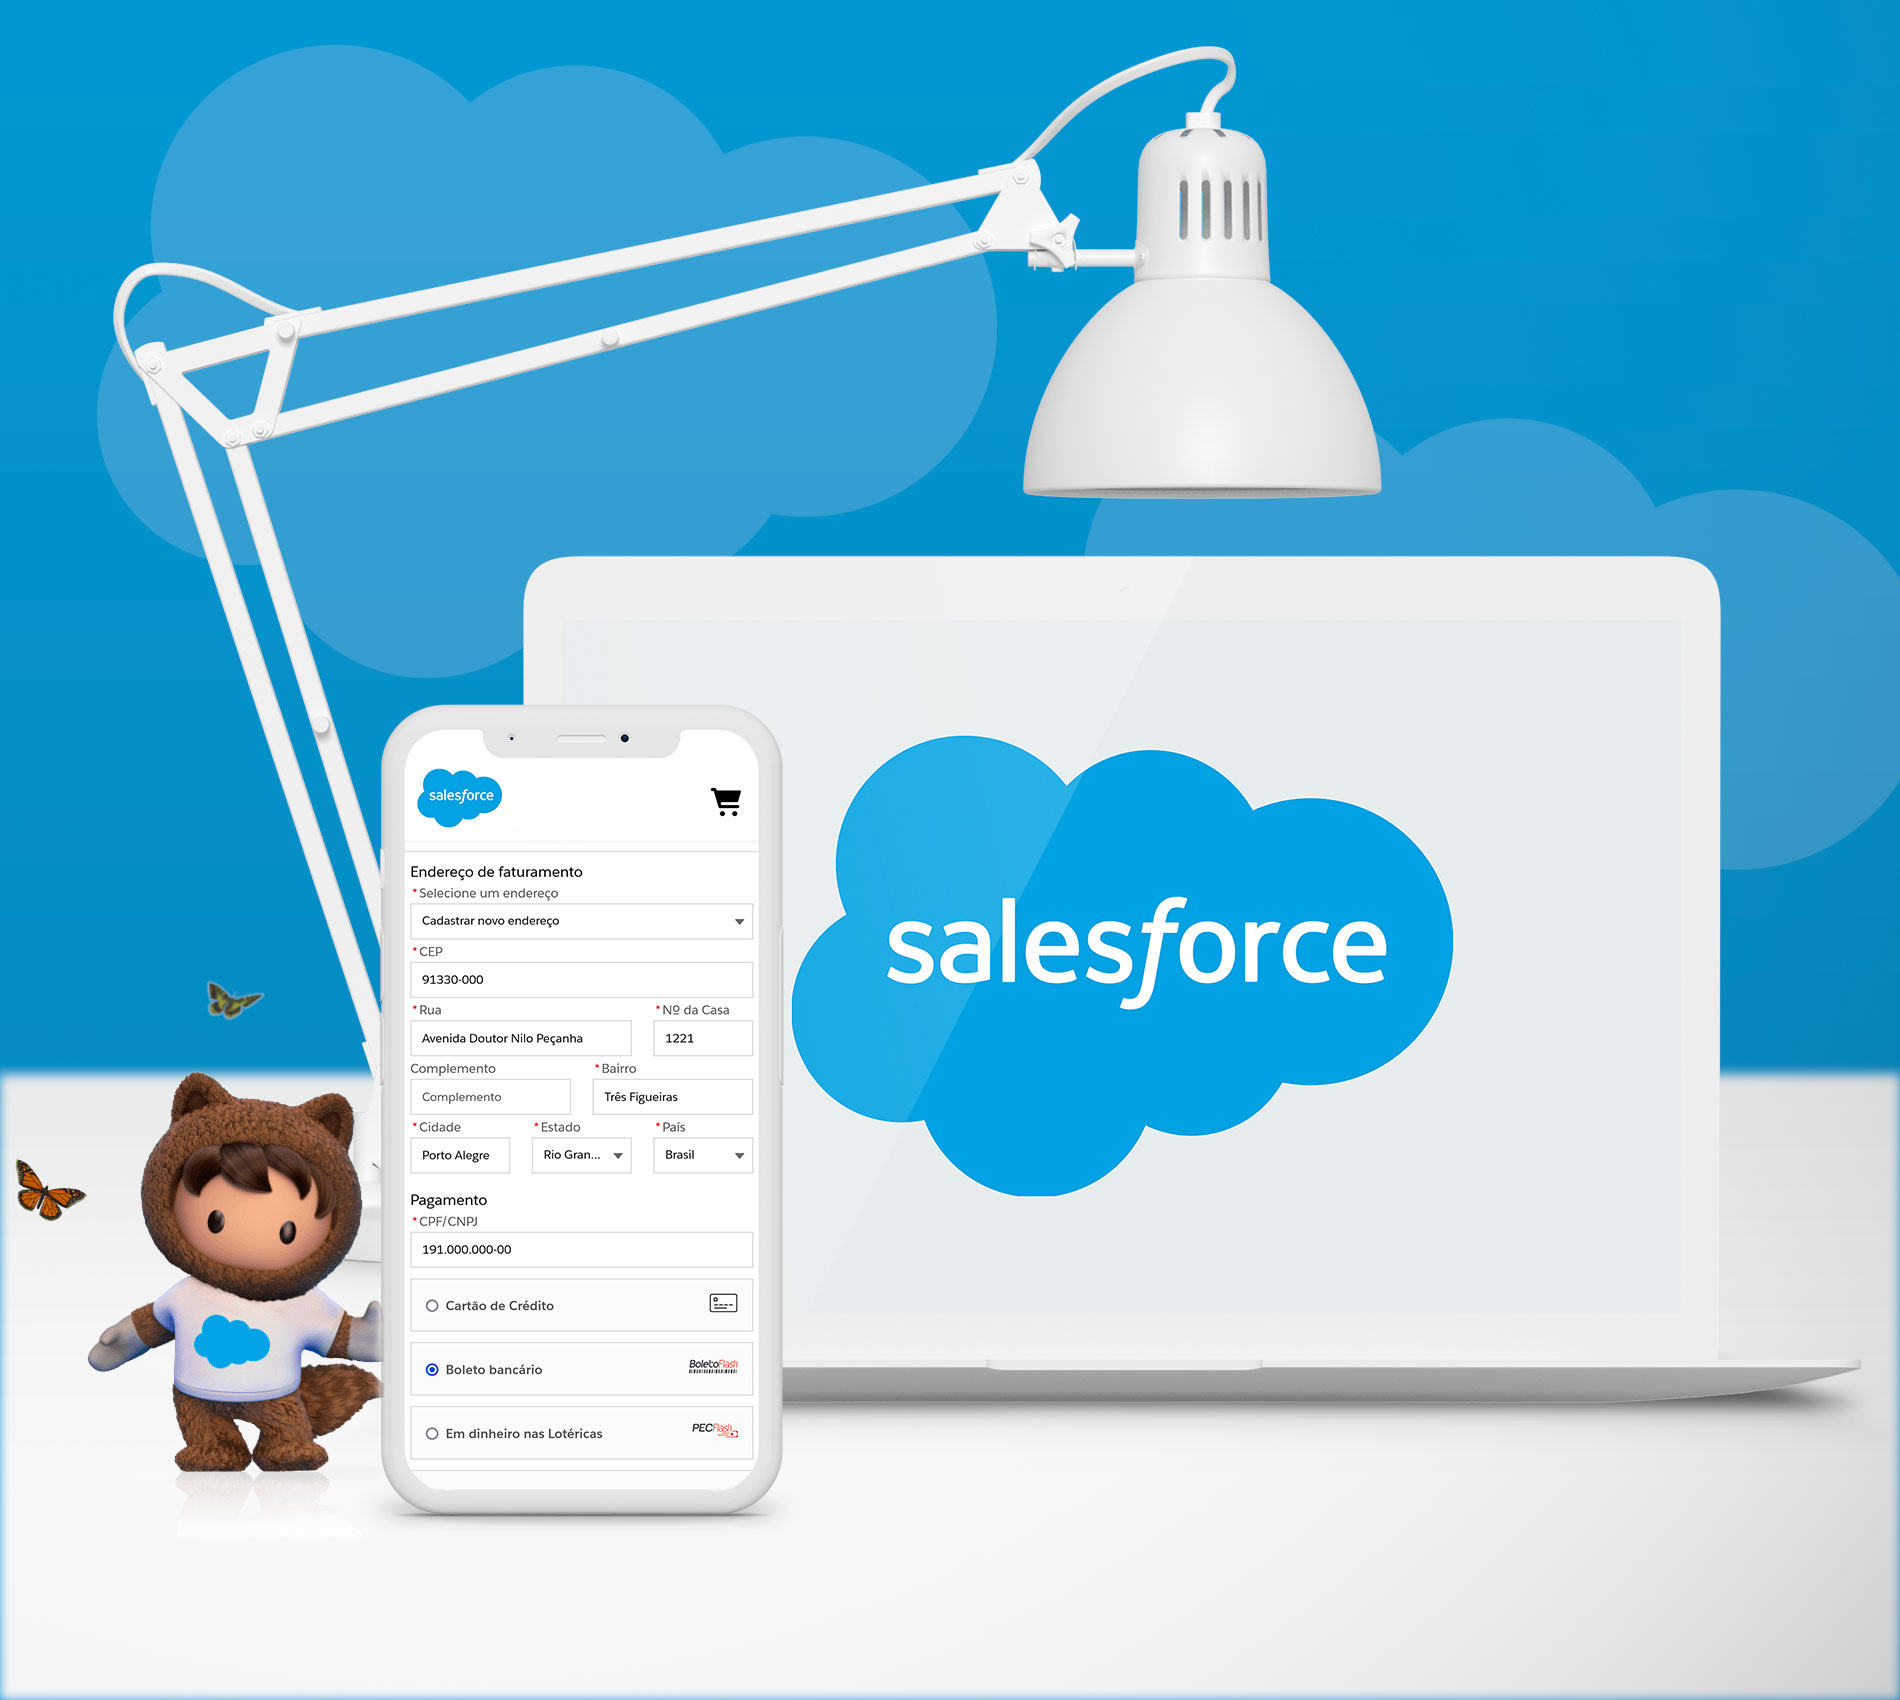 PagBrasil is recognized as a Salesforce ISV Partner